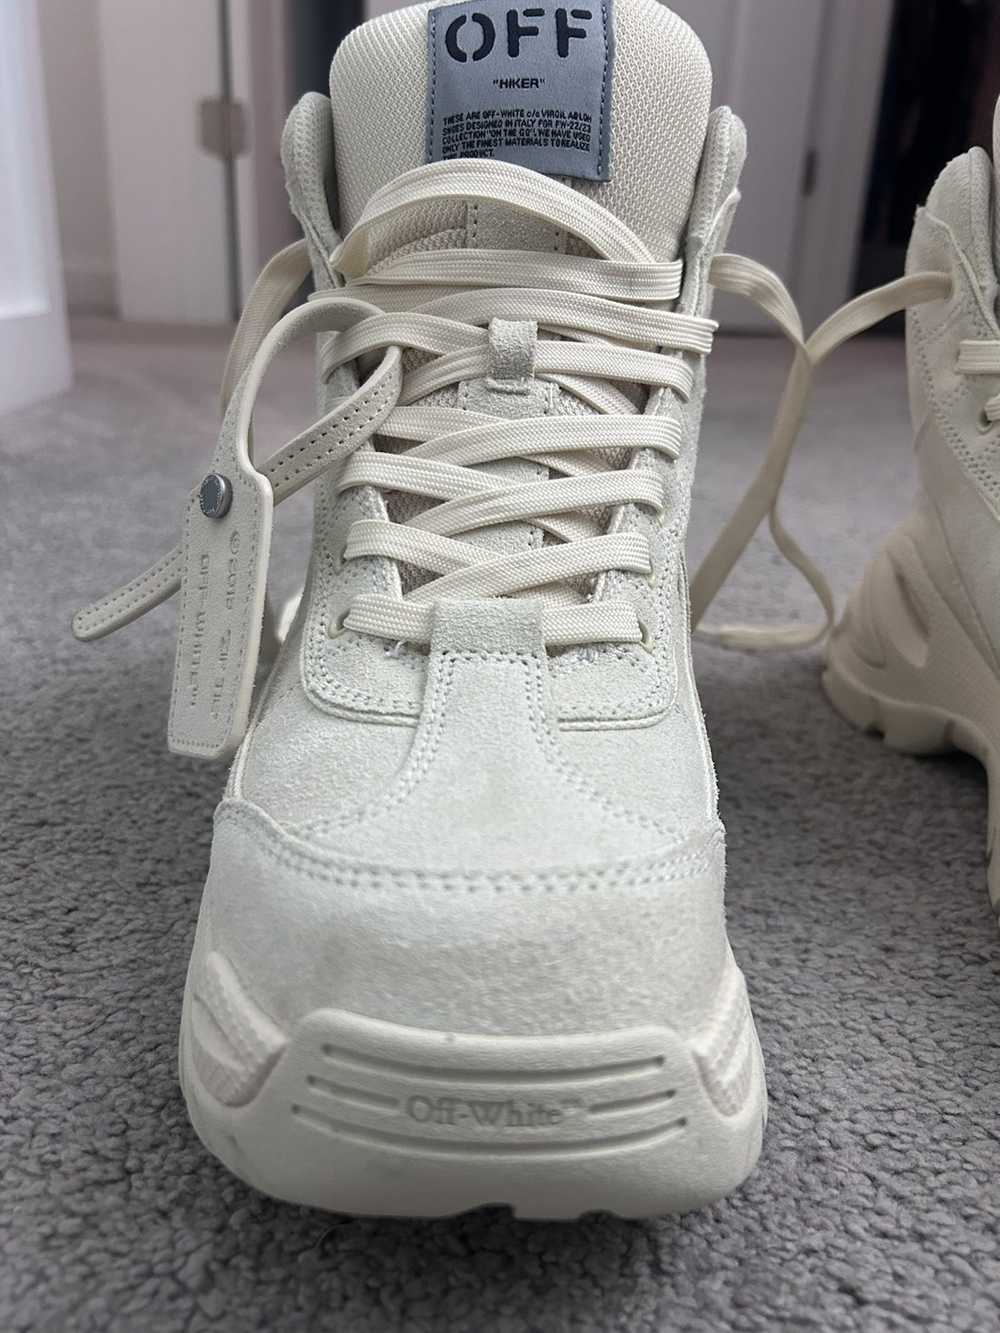 Off-White Hiker High Top Sneakers - image 2